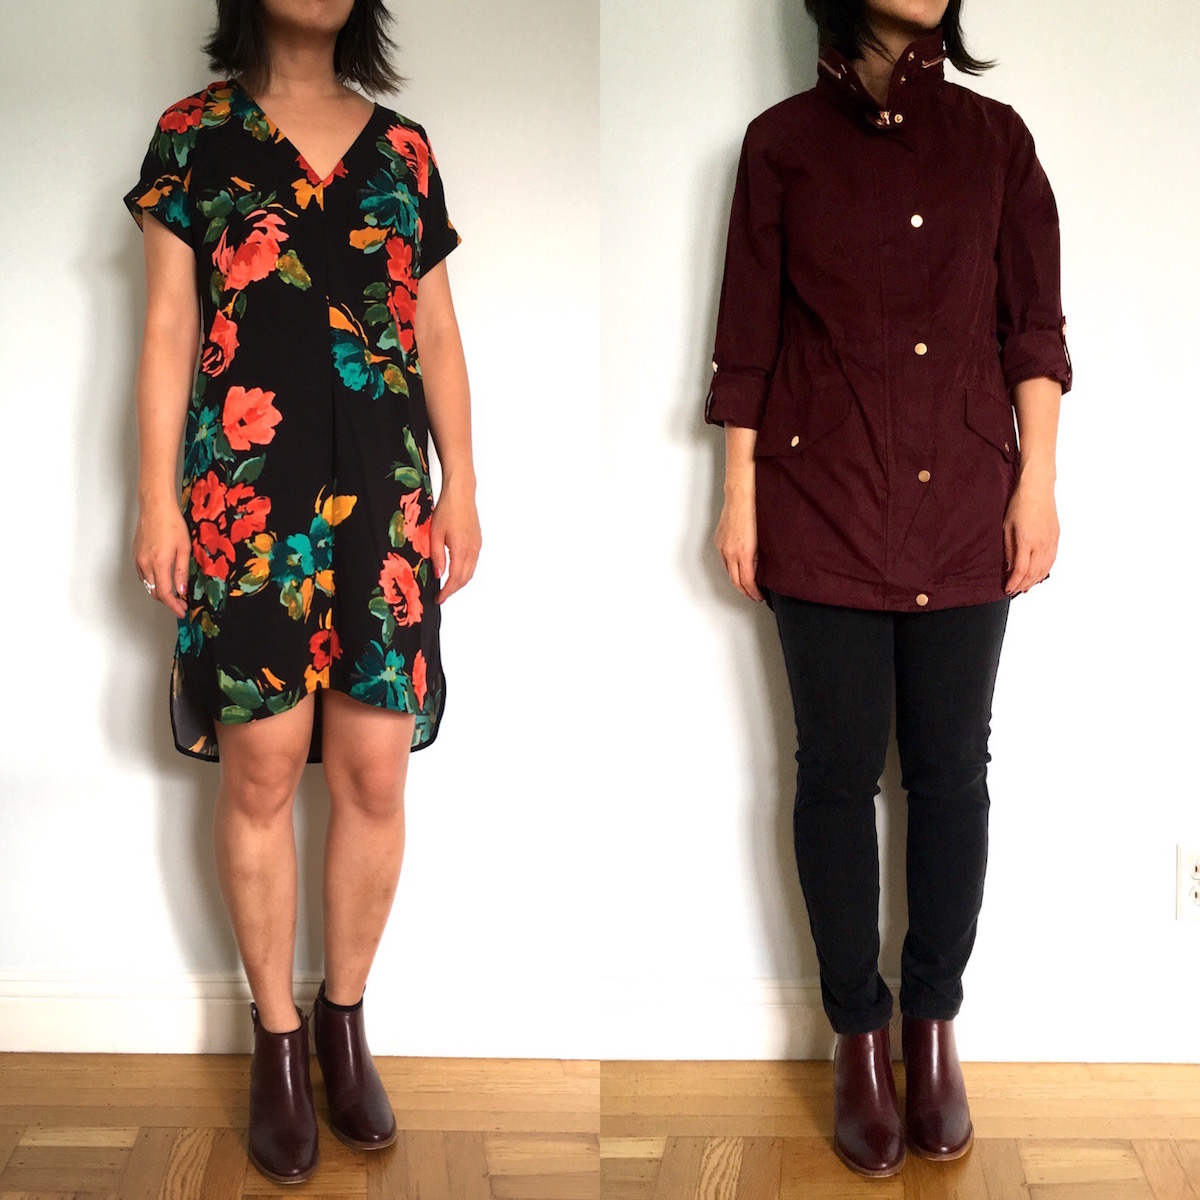 side by side photos of me, a petite woman, wearing a short sleeve floral shift dress, and a maroon anorak